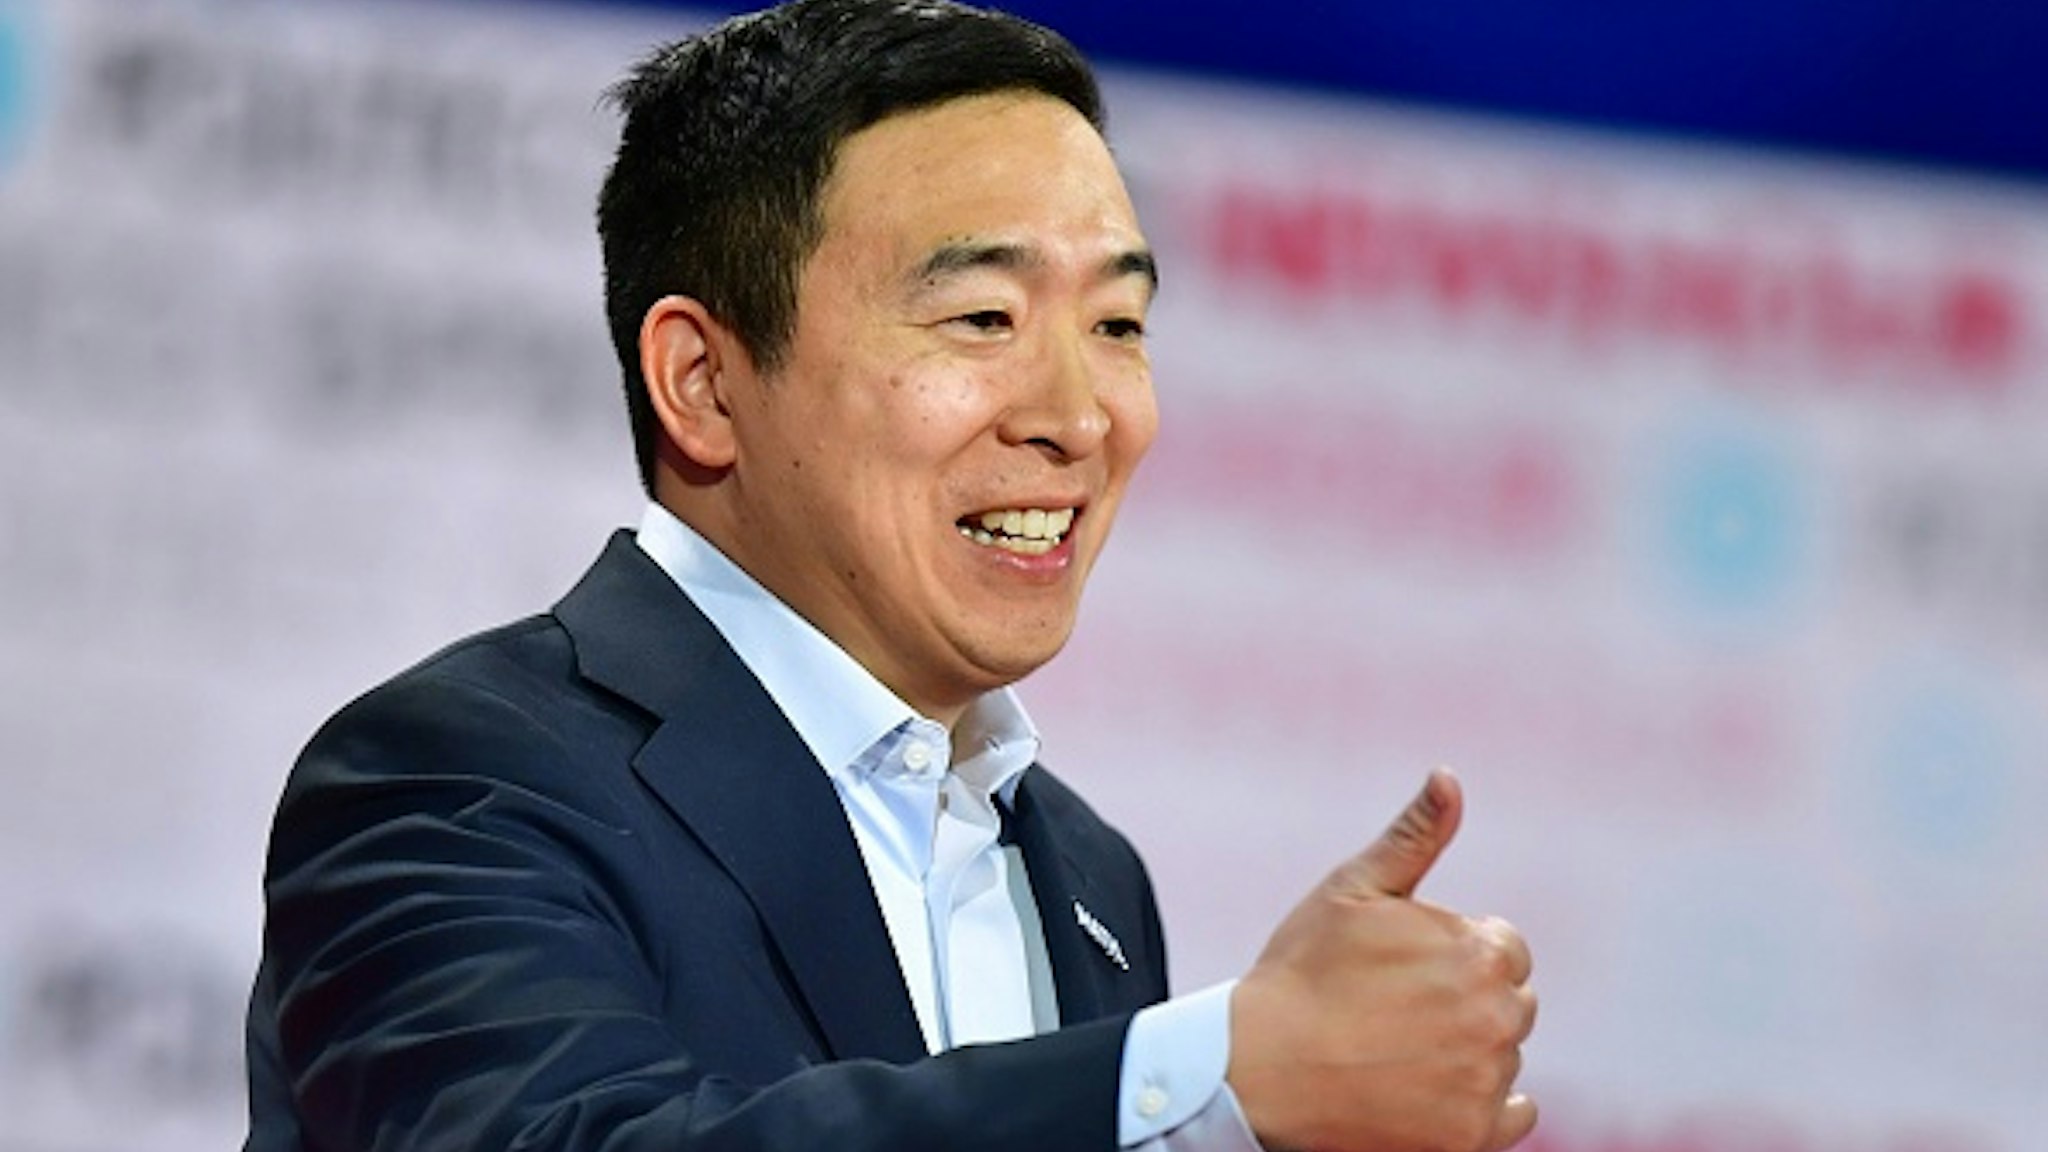 Democratic presidential hopeful entrepreneur Andrew Yang gestures during the sixth Democratic primary debate of the 2020 presidential campaign season co-hosted by PBS NewsHour &amp; Politico at Loyola Marymount University in Los Angeles, California on December 19, 2019.